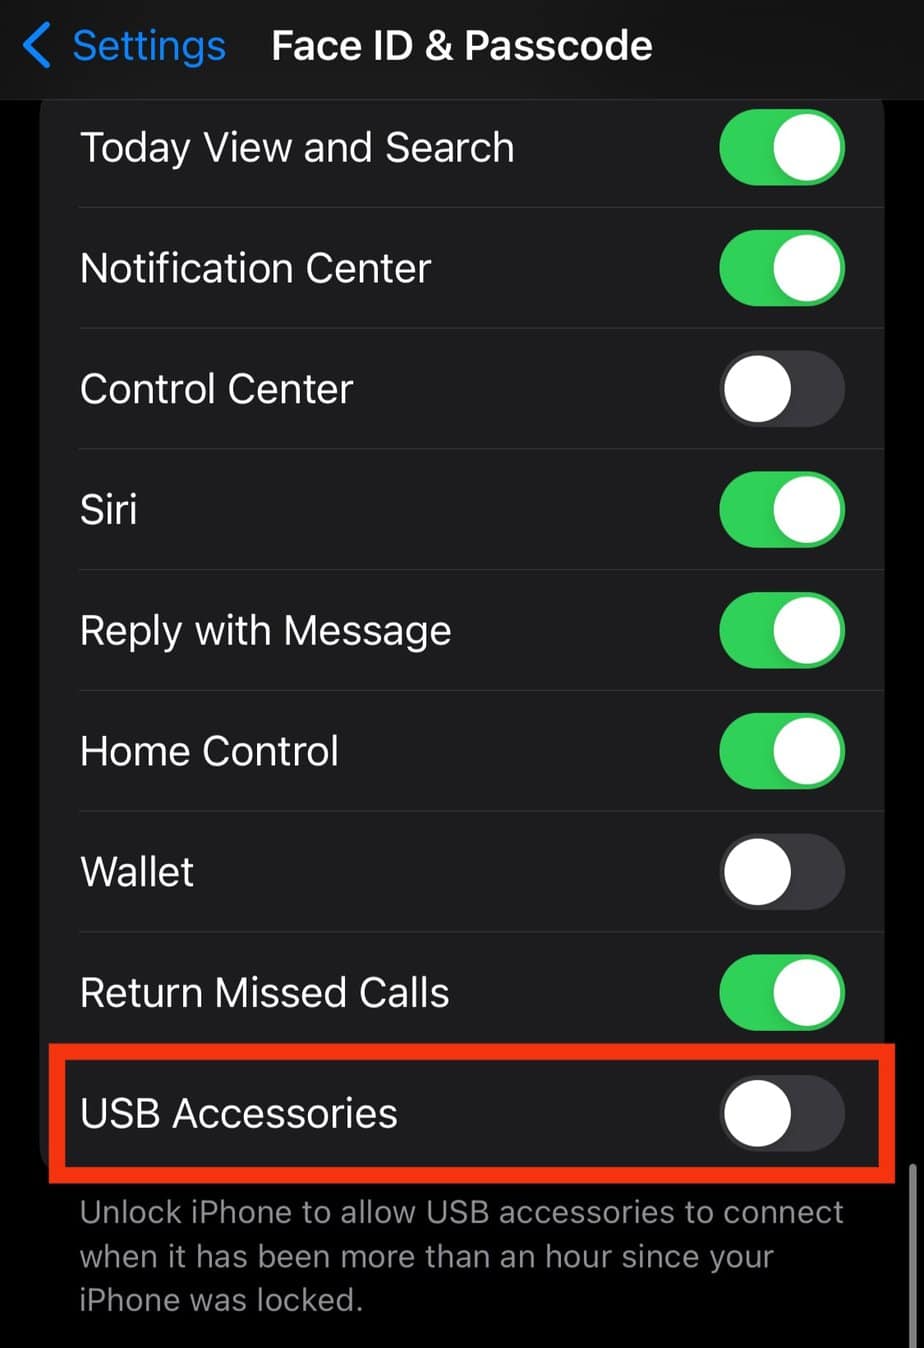 Disable USB Accessories